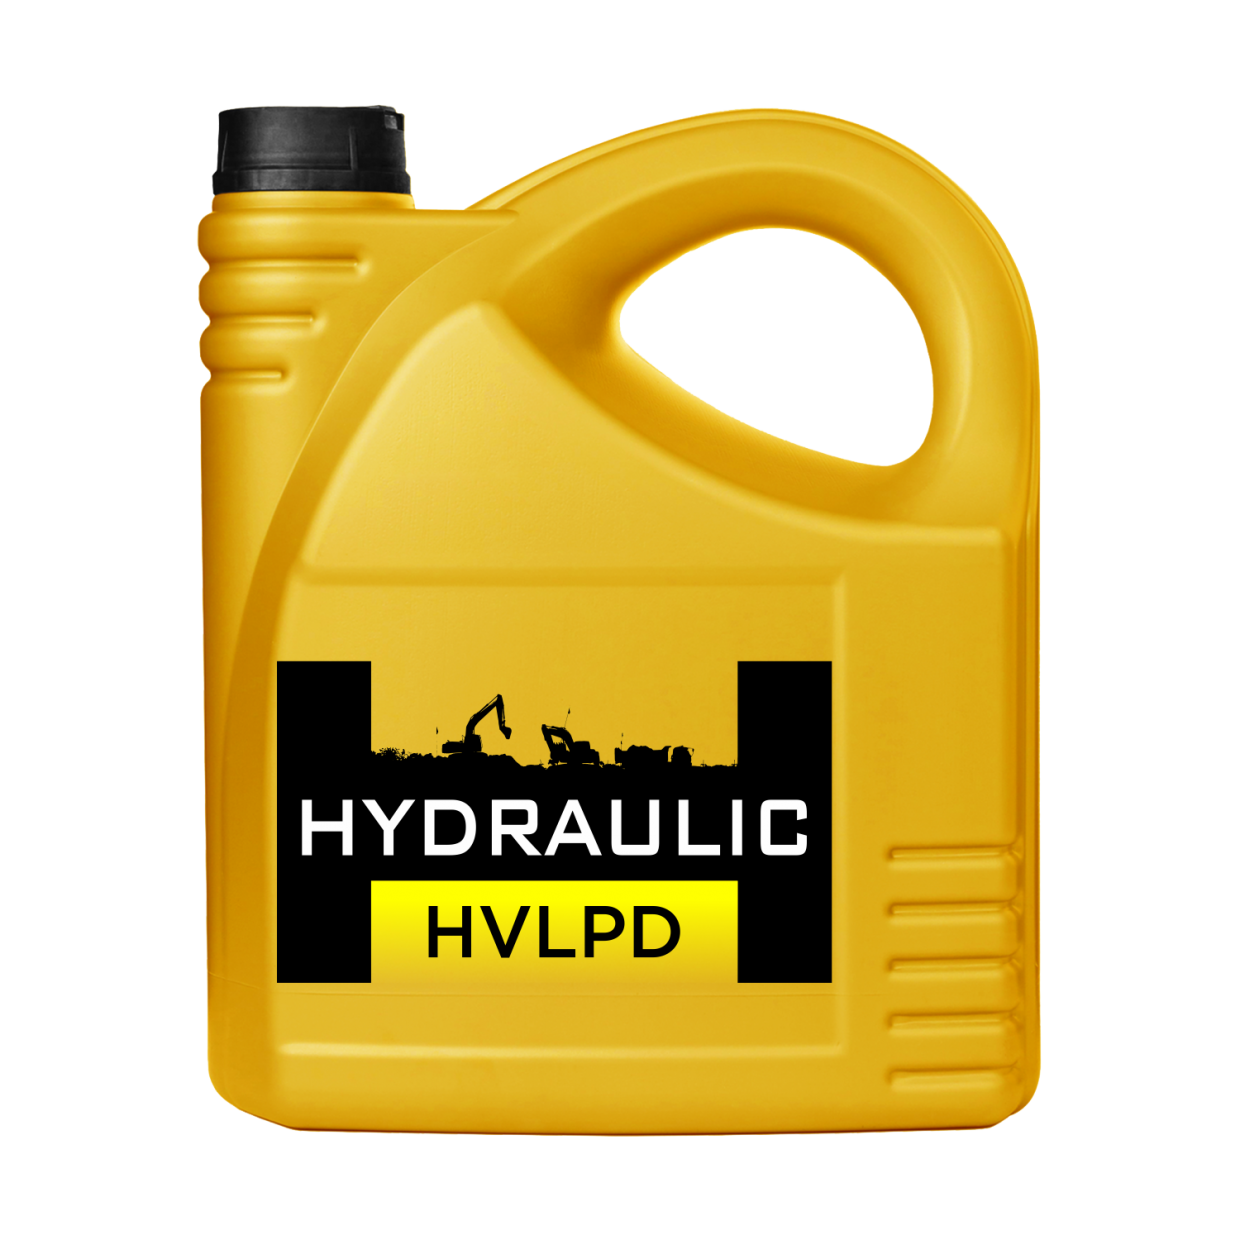 Масло Hydraulic 46. HLP 46 масло гидравлическое. Масло гидравлическое HVLP 46. Масло гидравлическое 45